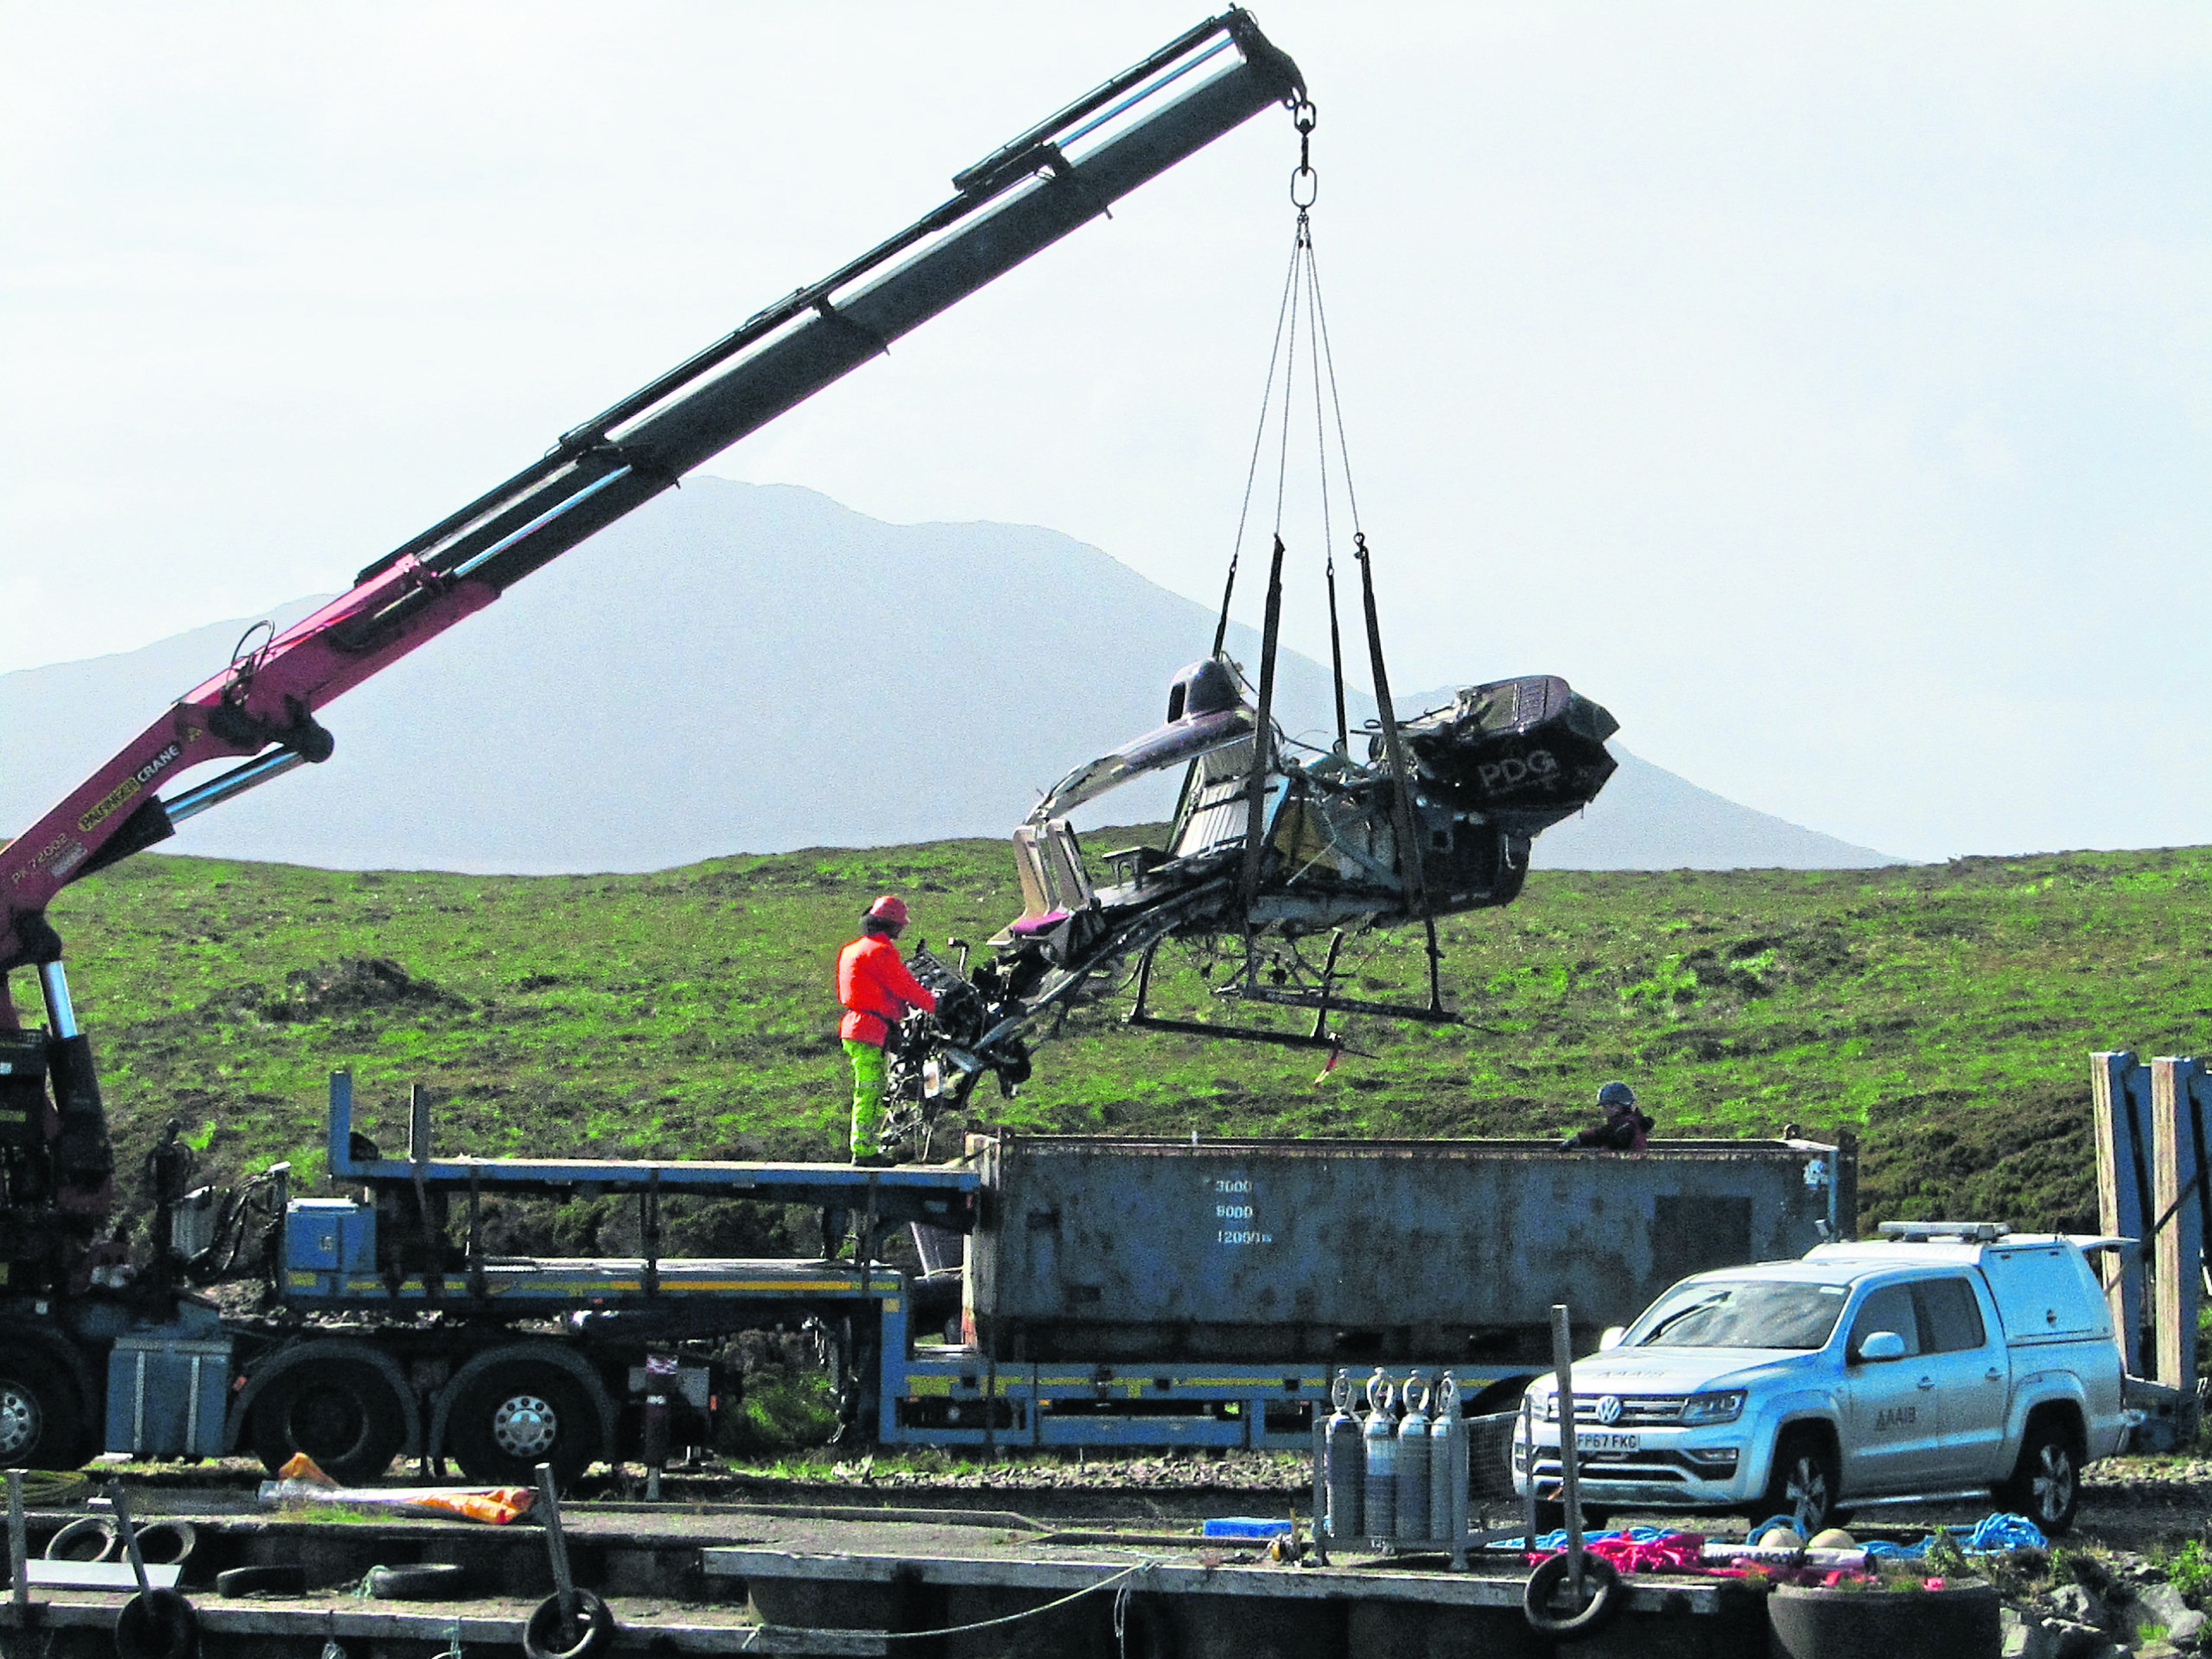 The helicopter has been salvaged from the loch